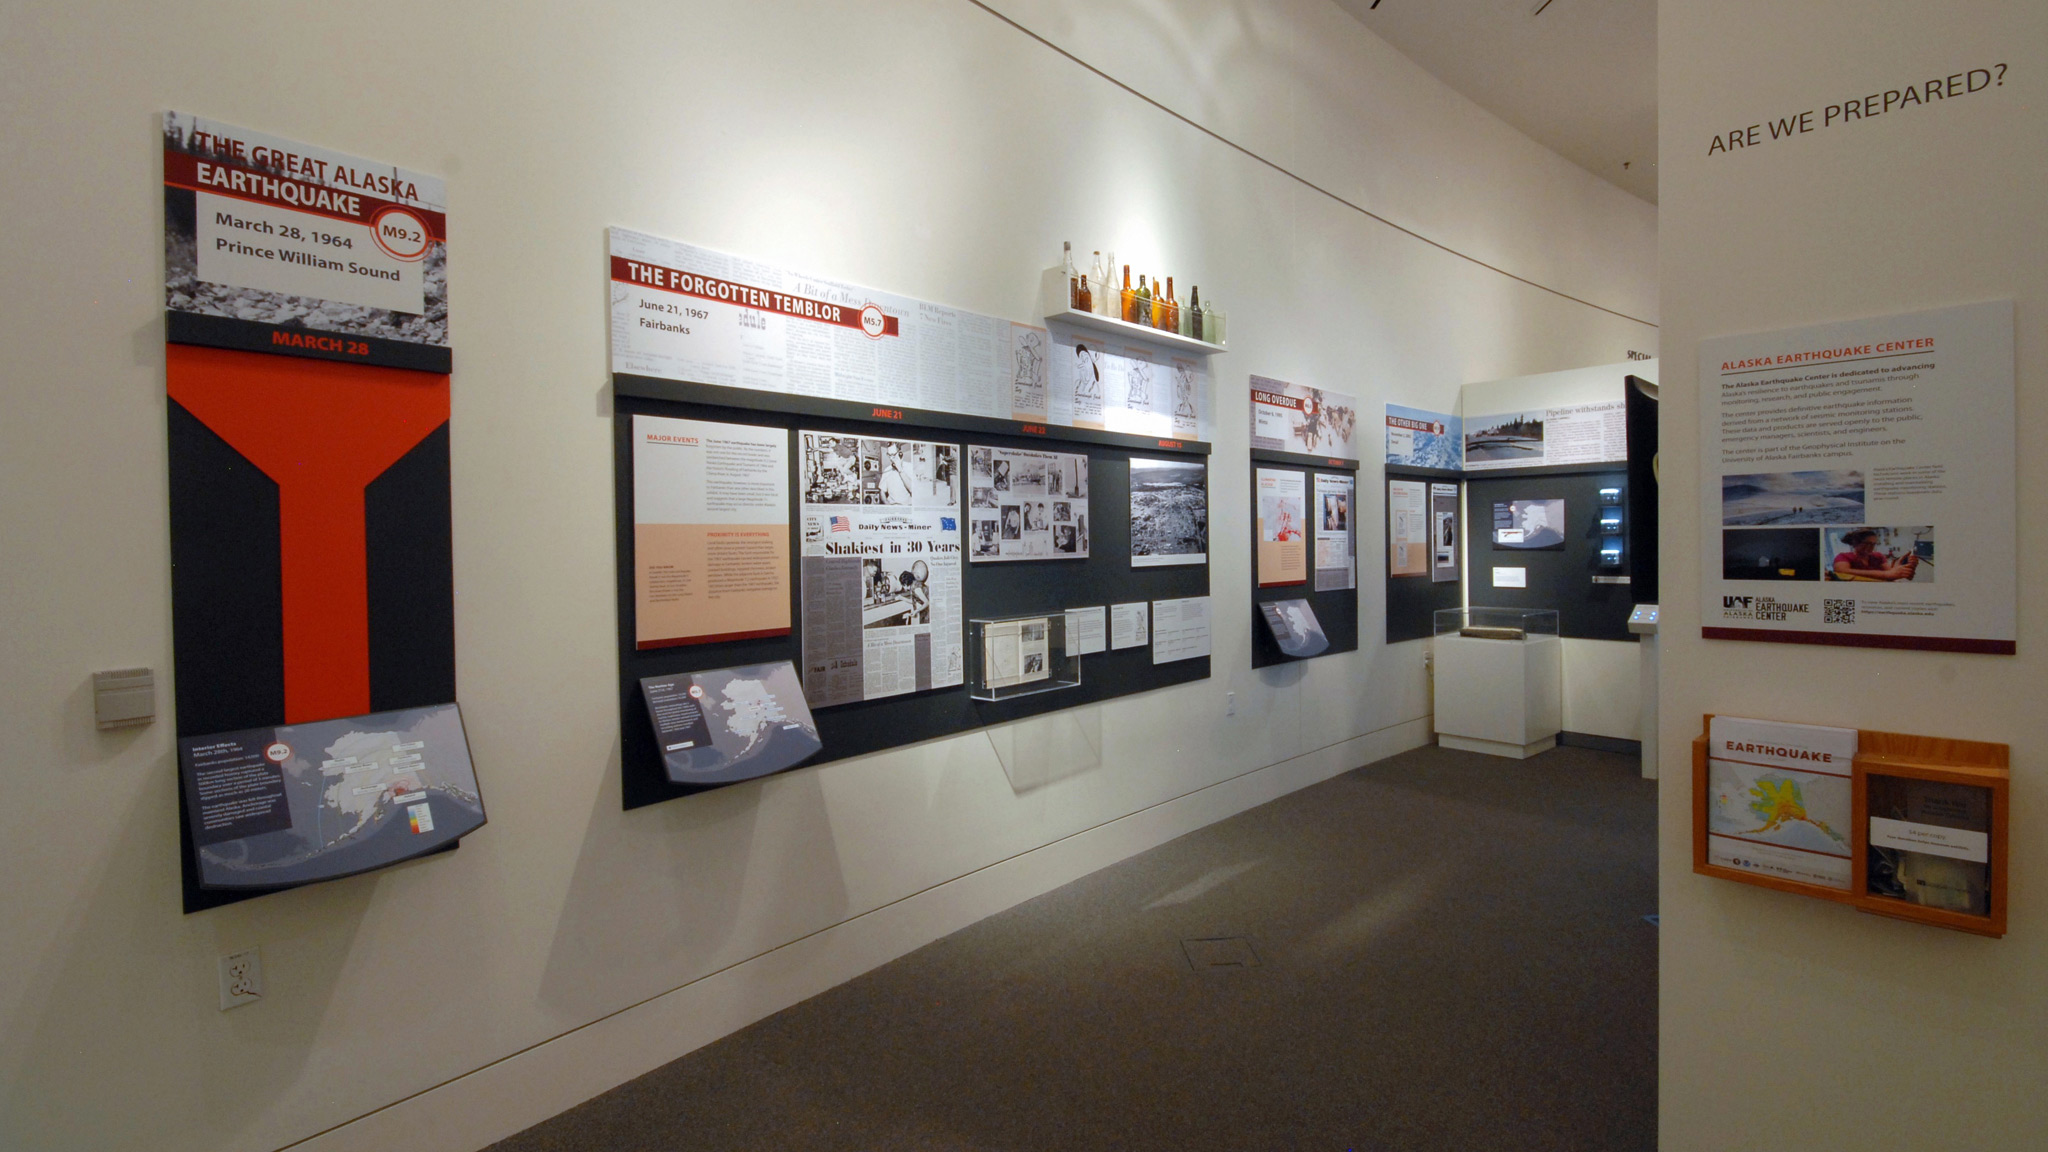 Looking west along the south wall of the gallery and the exhibits for the 1964, 1967, 1995, and 2002 earthquake events.